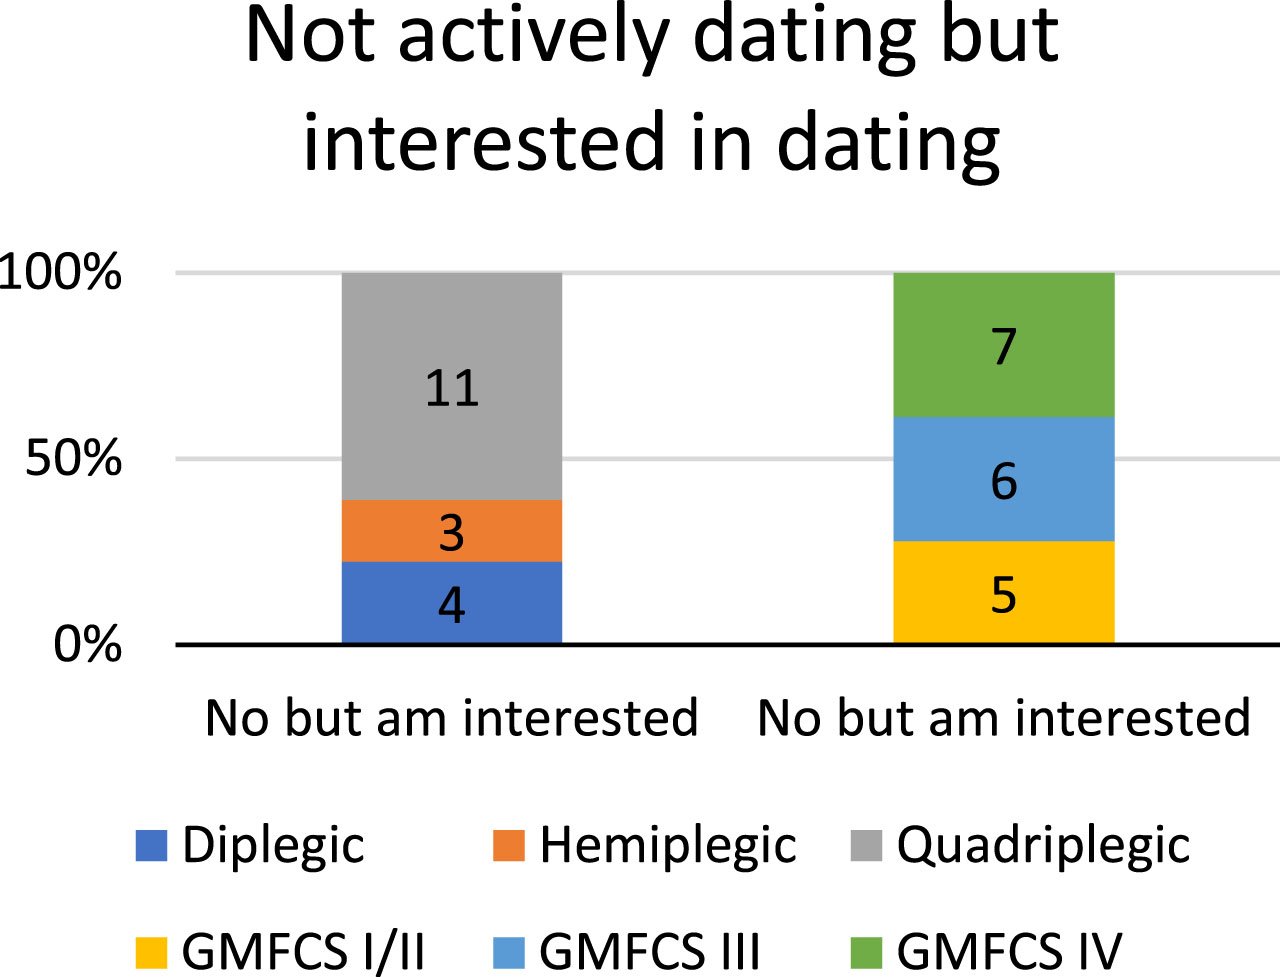 Active dating status by Gross Motor Function Classification System (GMFCS) level and topographical distribution.